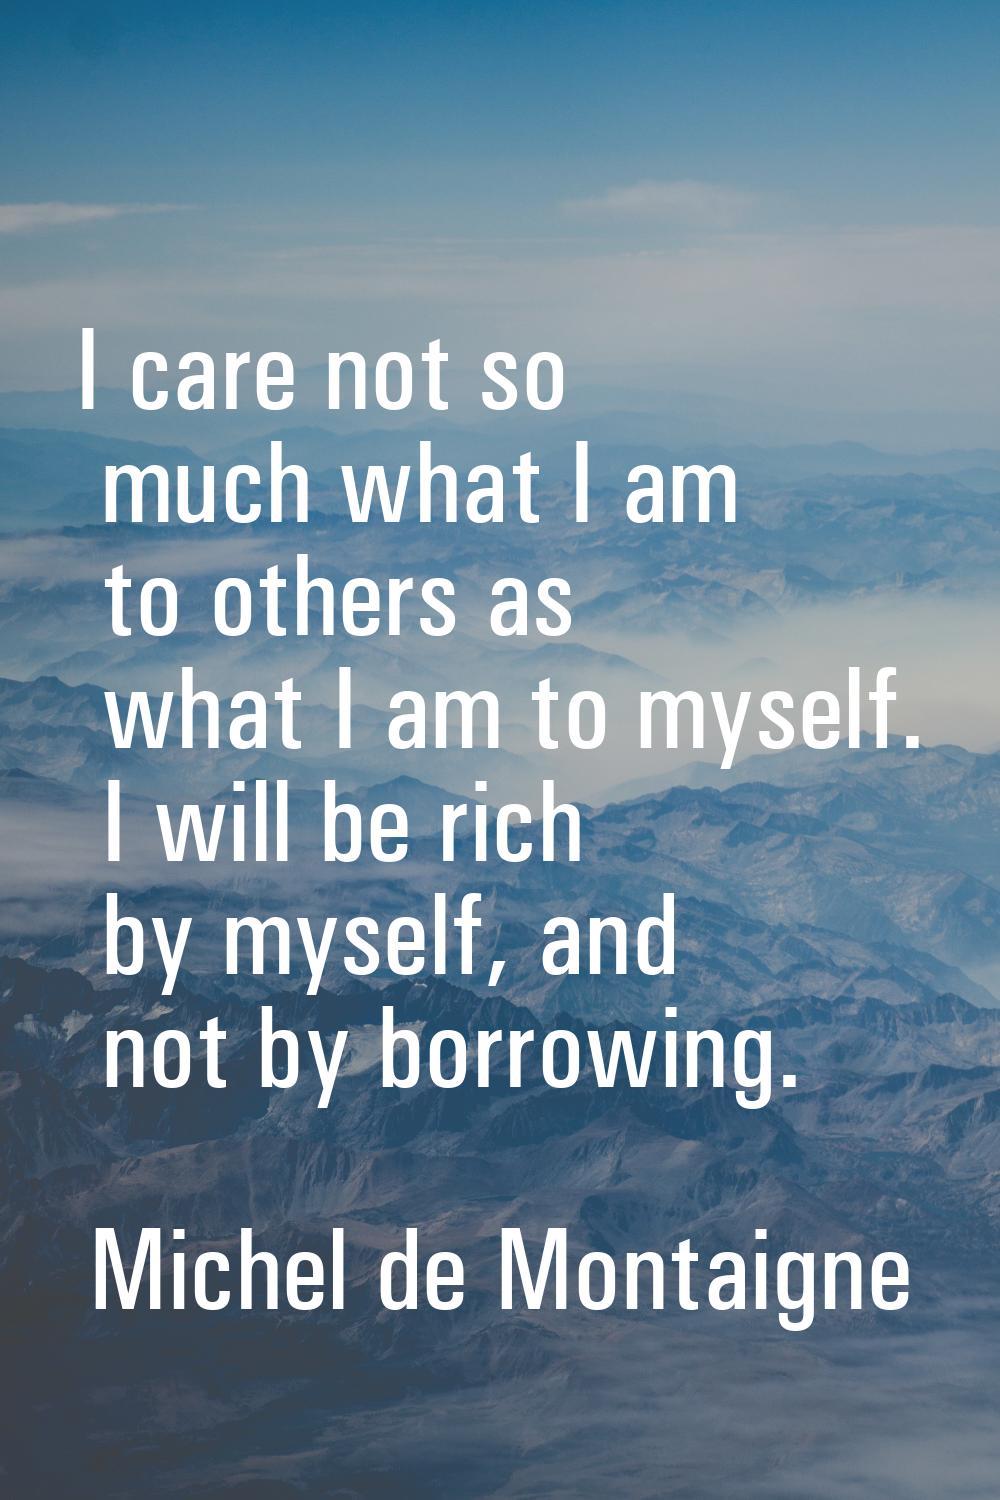 I care not so much what I am to others as what I am to myself. I will be rich by myself, and not by